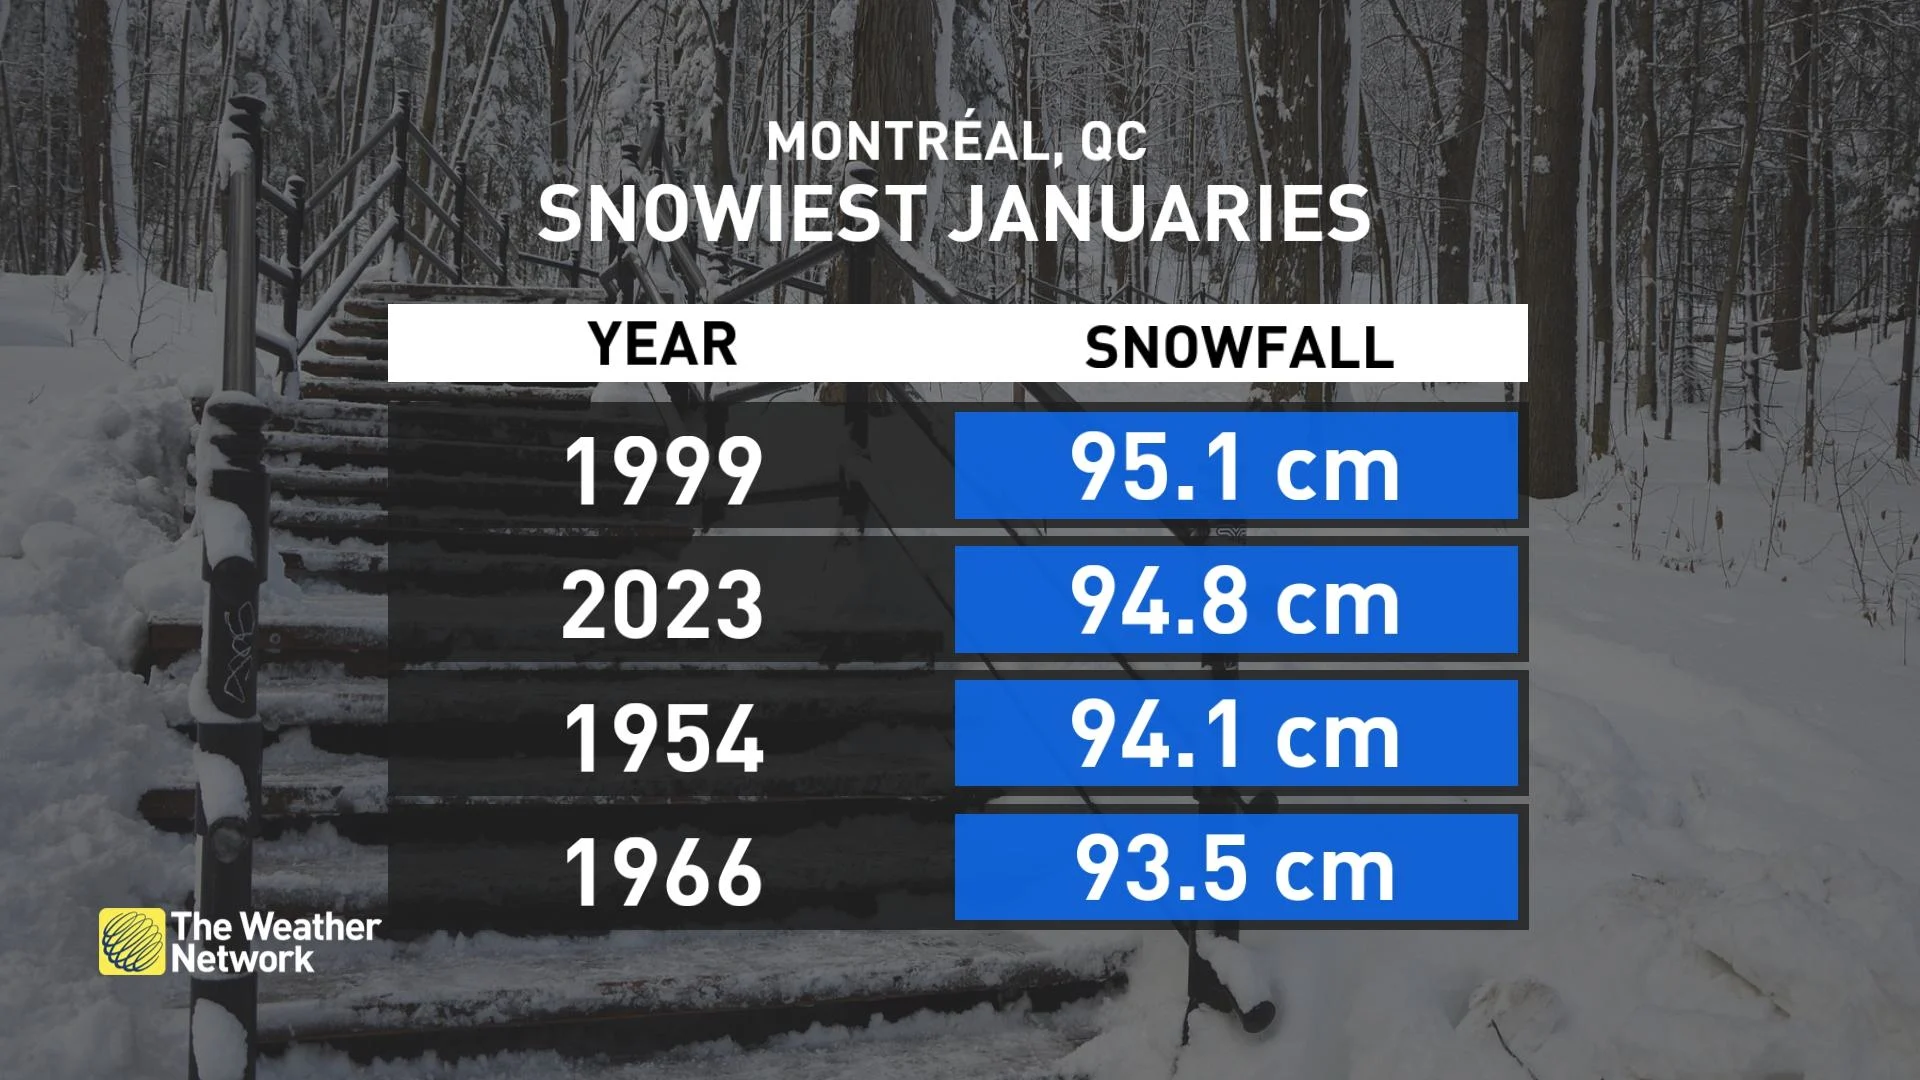 Montreal Snowfall Records for the month of January (2023 graphic)